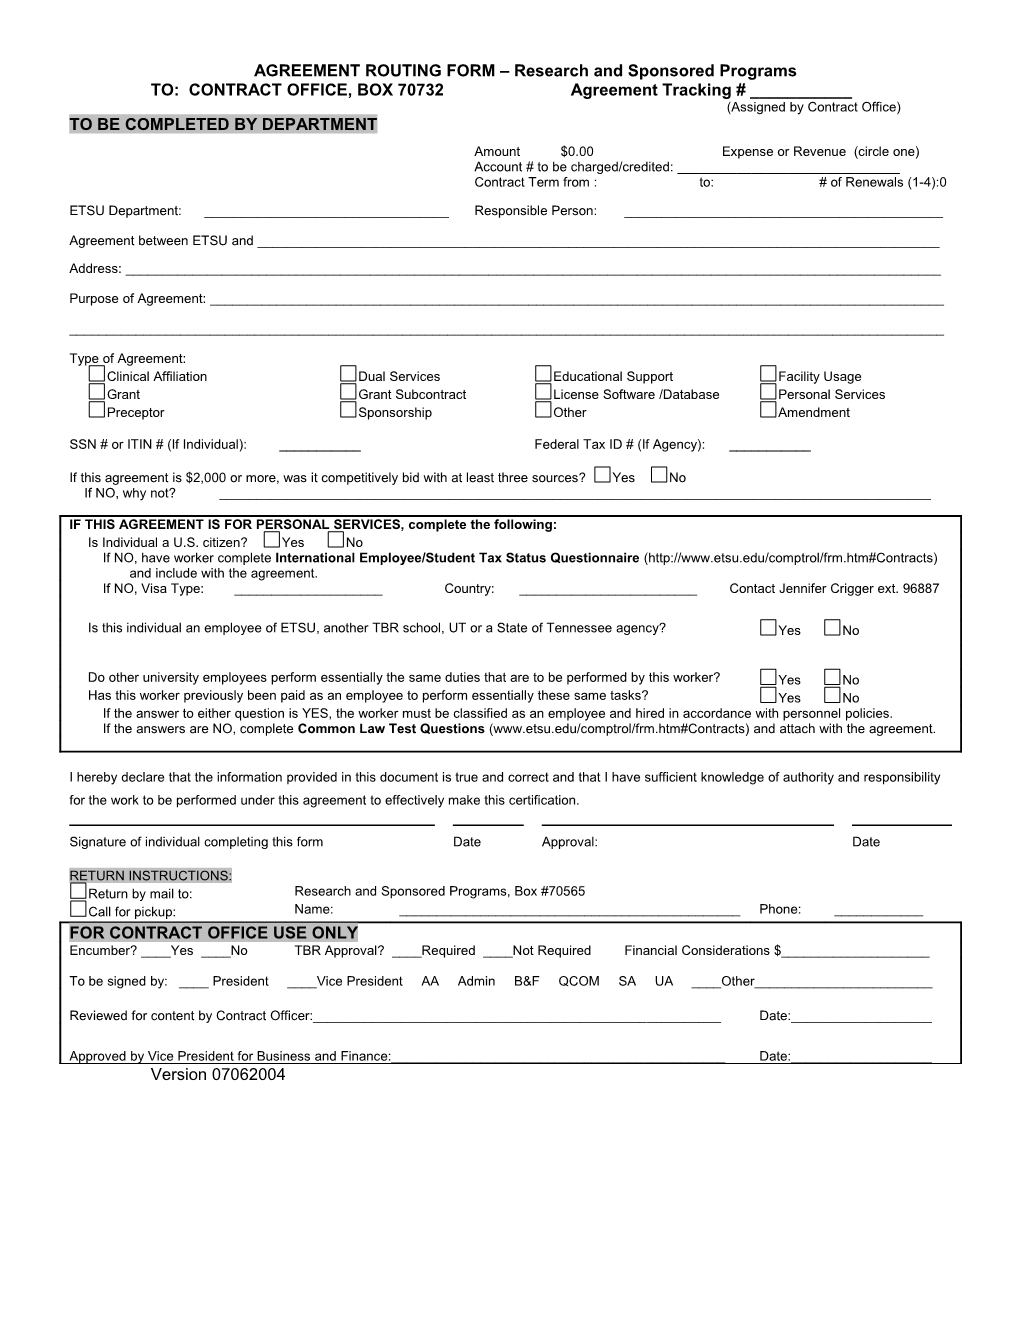 Agreement Routing Form - General